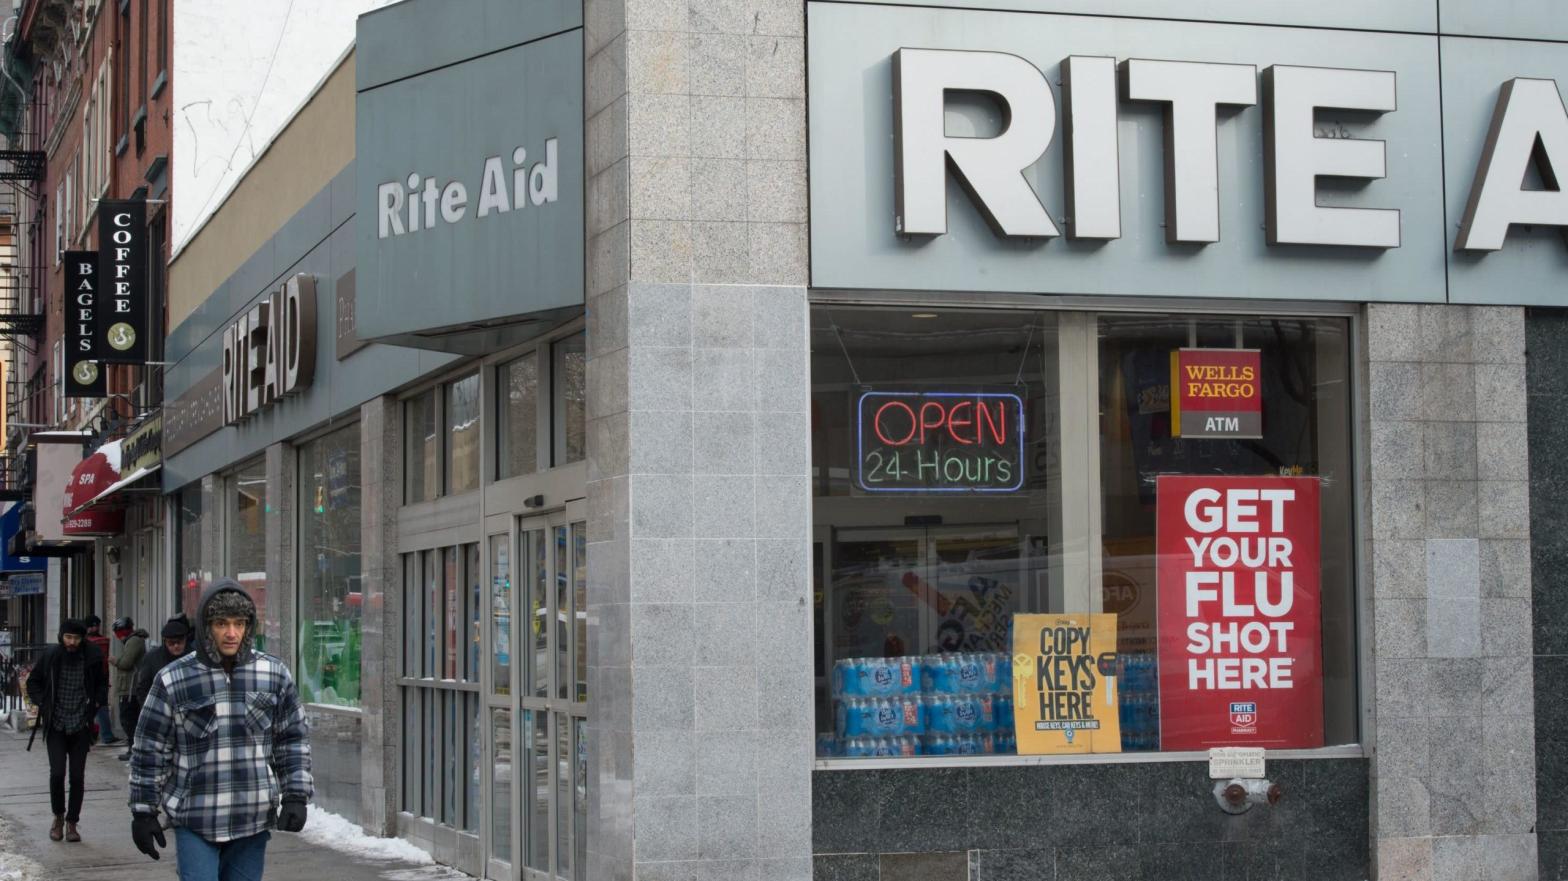 A Rite Aid in Chinatown, January 2018. (Photo: Bryan A. Smith/AFP, Getty Images)